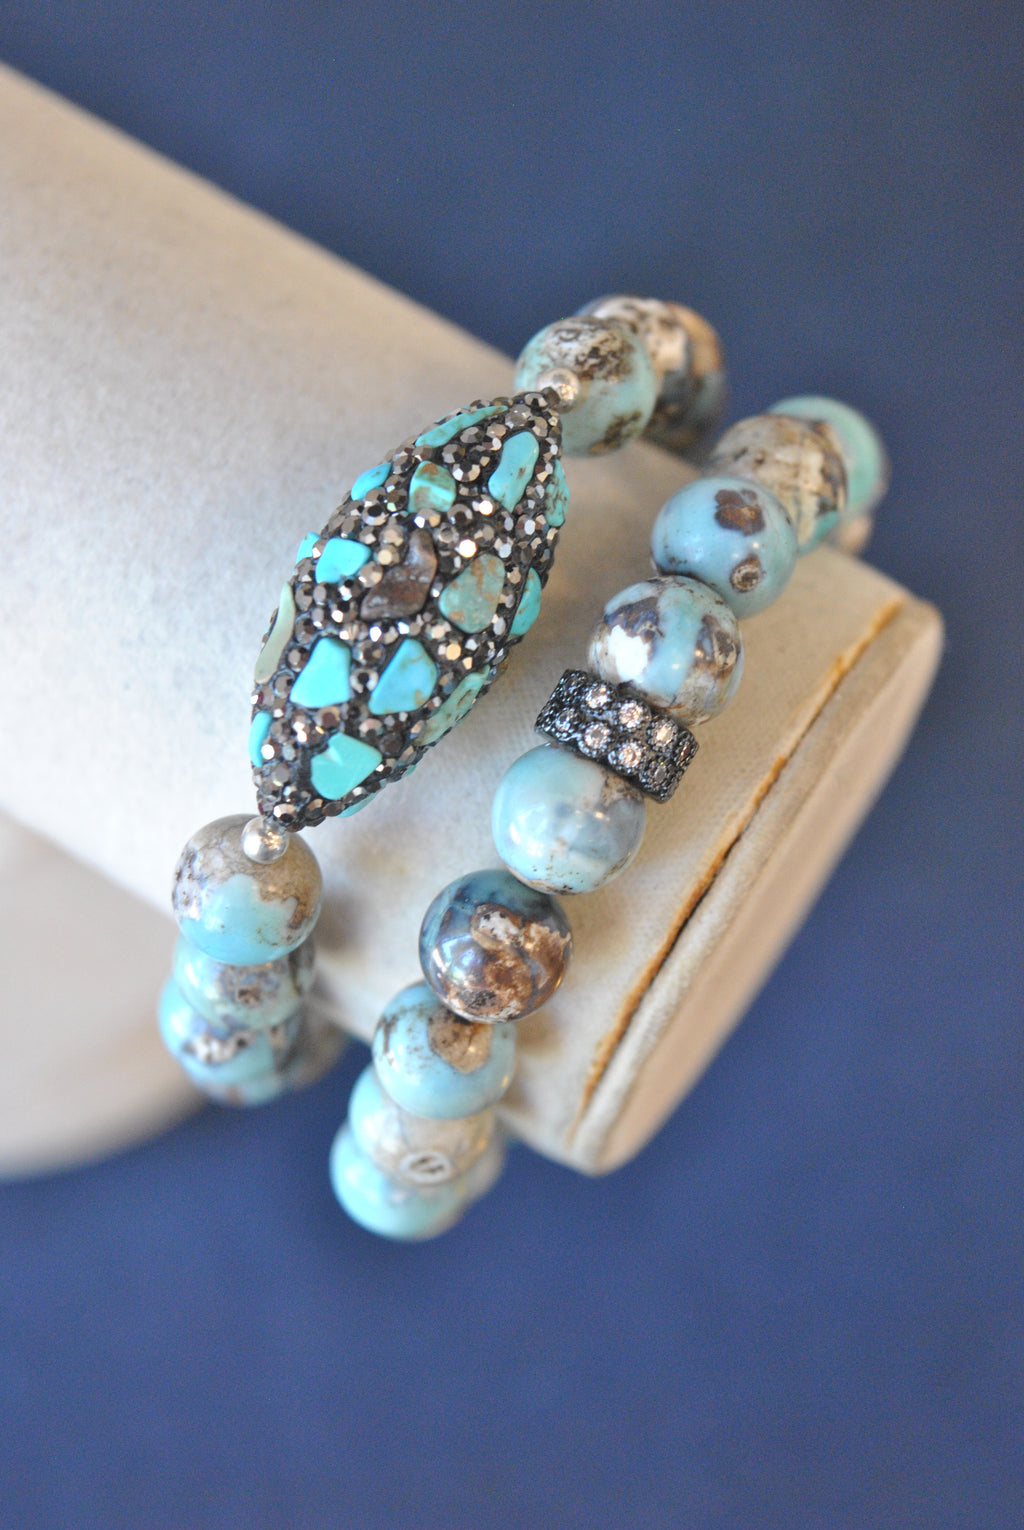 BLUE AND BEIGE AGATE WITH SWAROVSKI CRYSTALS AND RHINESTONES STRETCHY BRACELETS SET